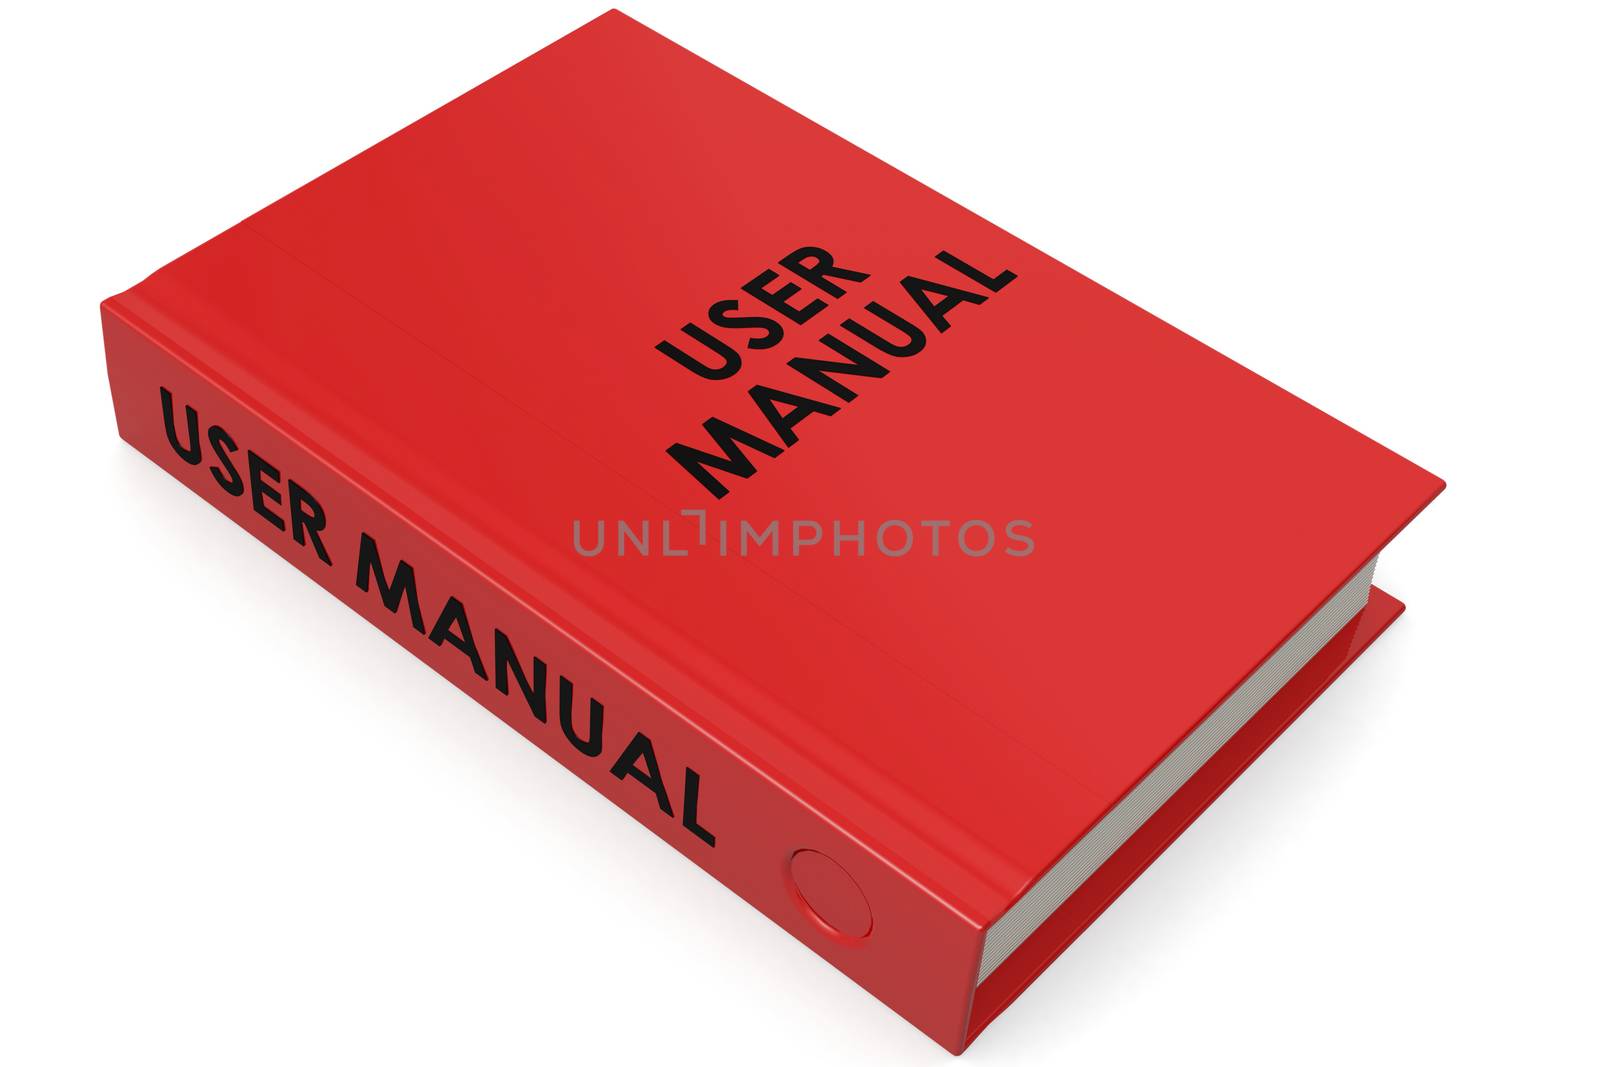 User manual isolated on white background by tang90246